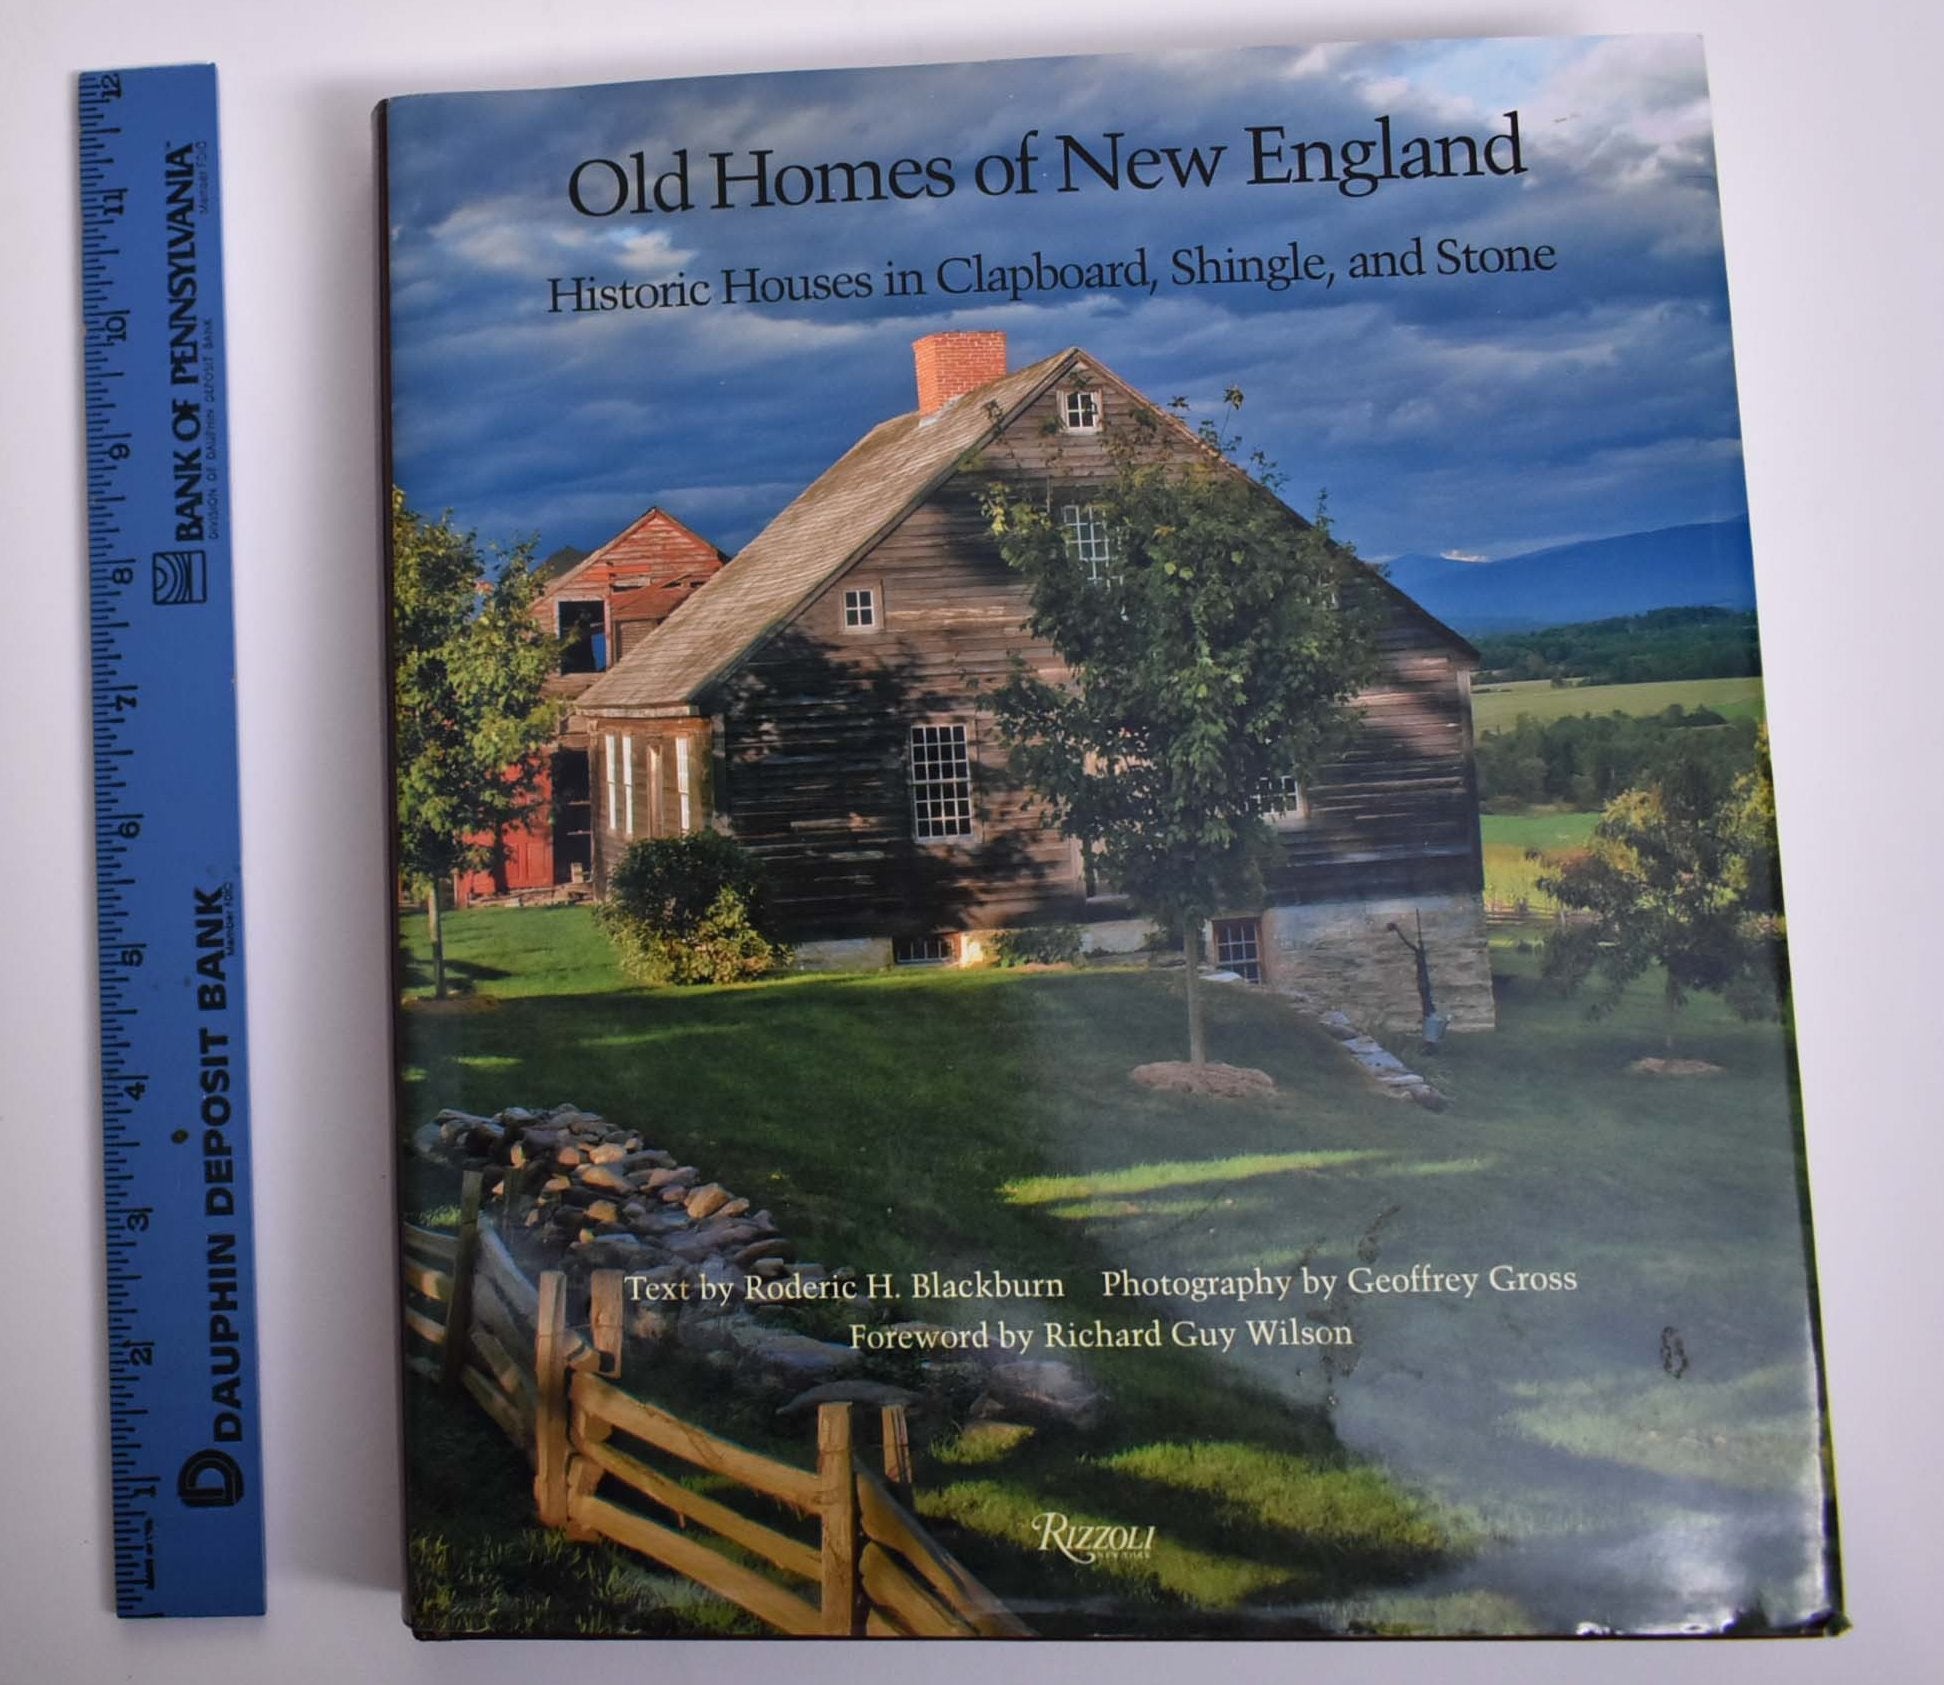 Old Homes of New England: Historic Houses in Clapboard, Shingle